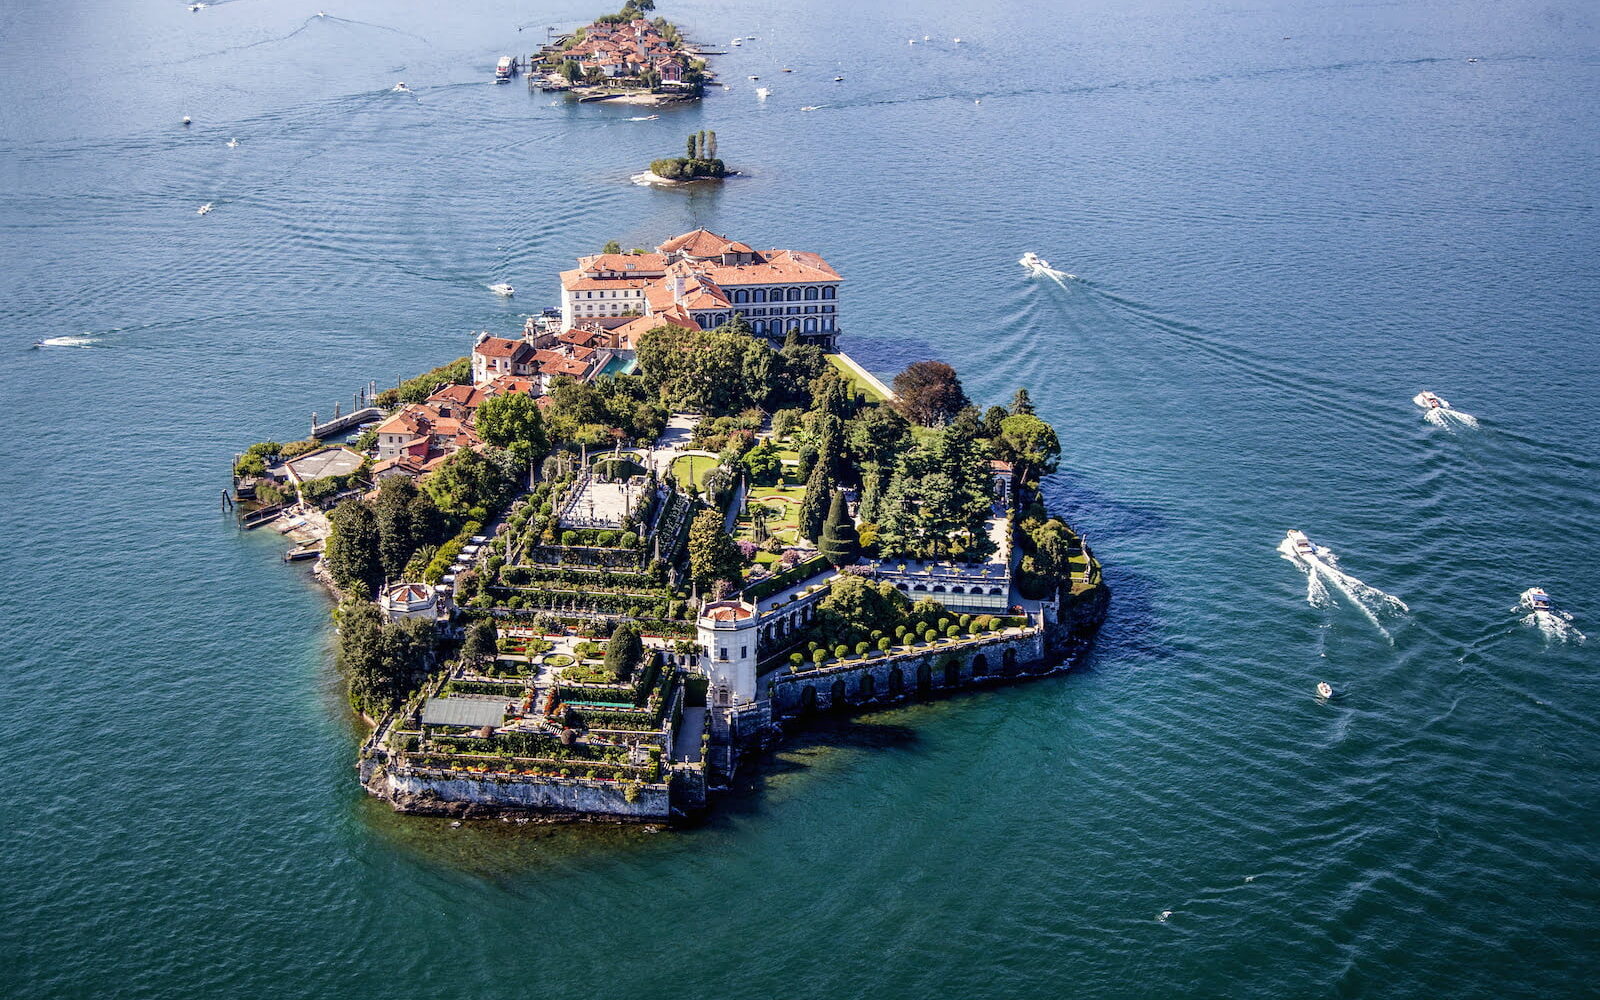 Borromean Islands on Lago Maggiore: History, Family, How to Get There ...